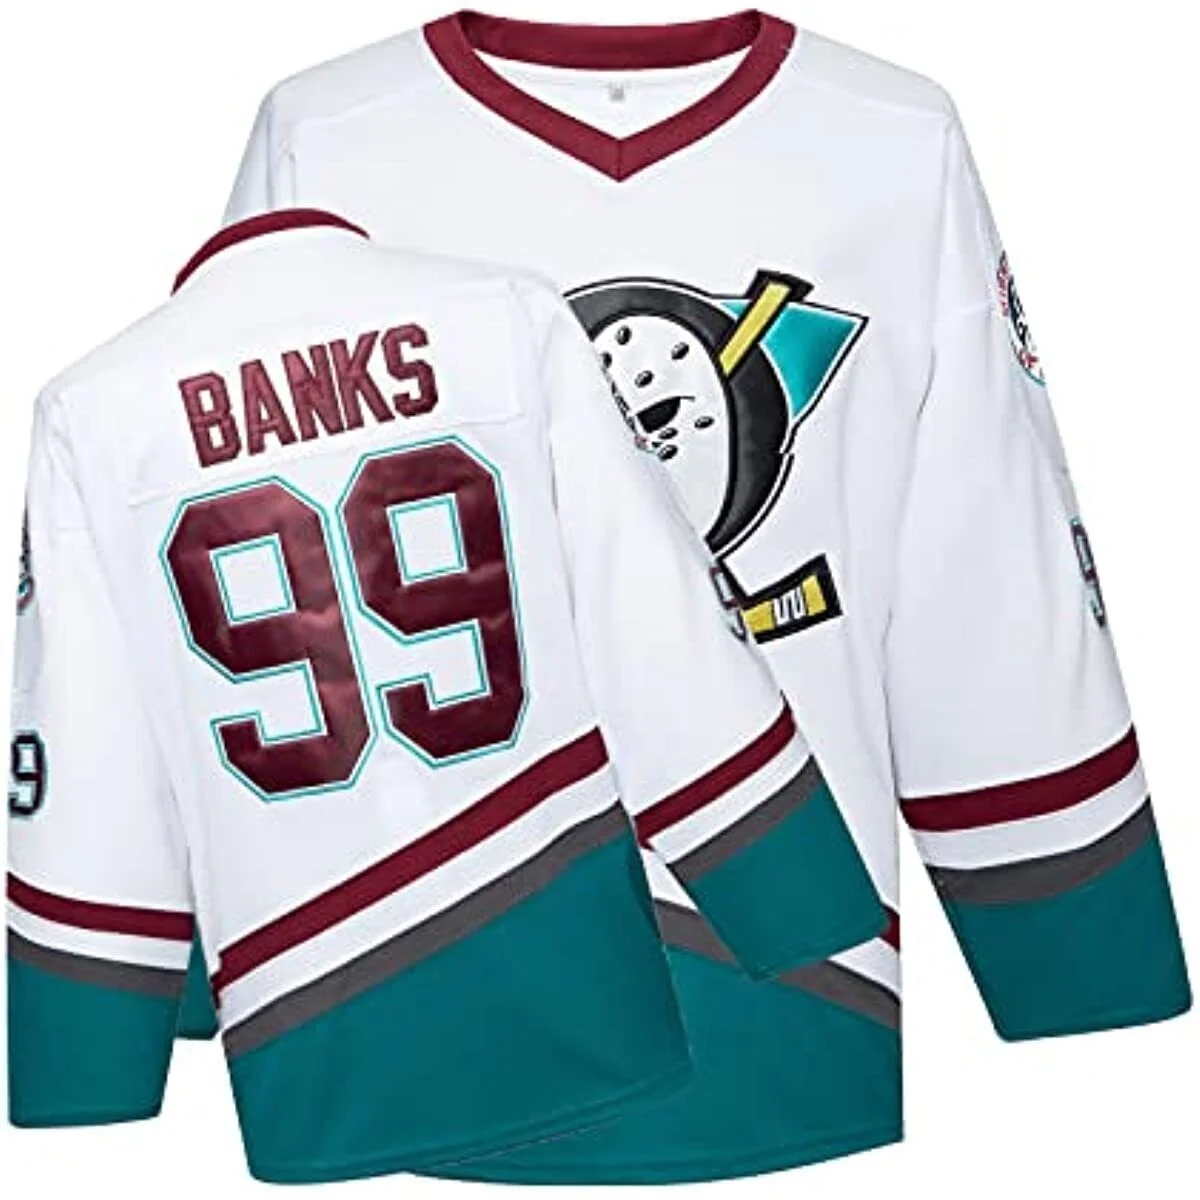 Rare Stitched Adam Banks #9 Hawks Hockey Jerseys Embroidery Stitched Any  Number And Name - Ice Hockey Jerseys - AliExpress